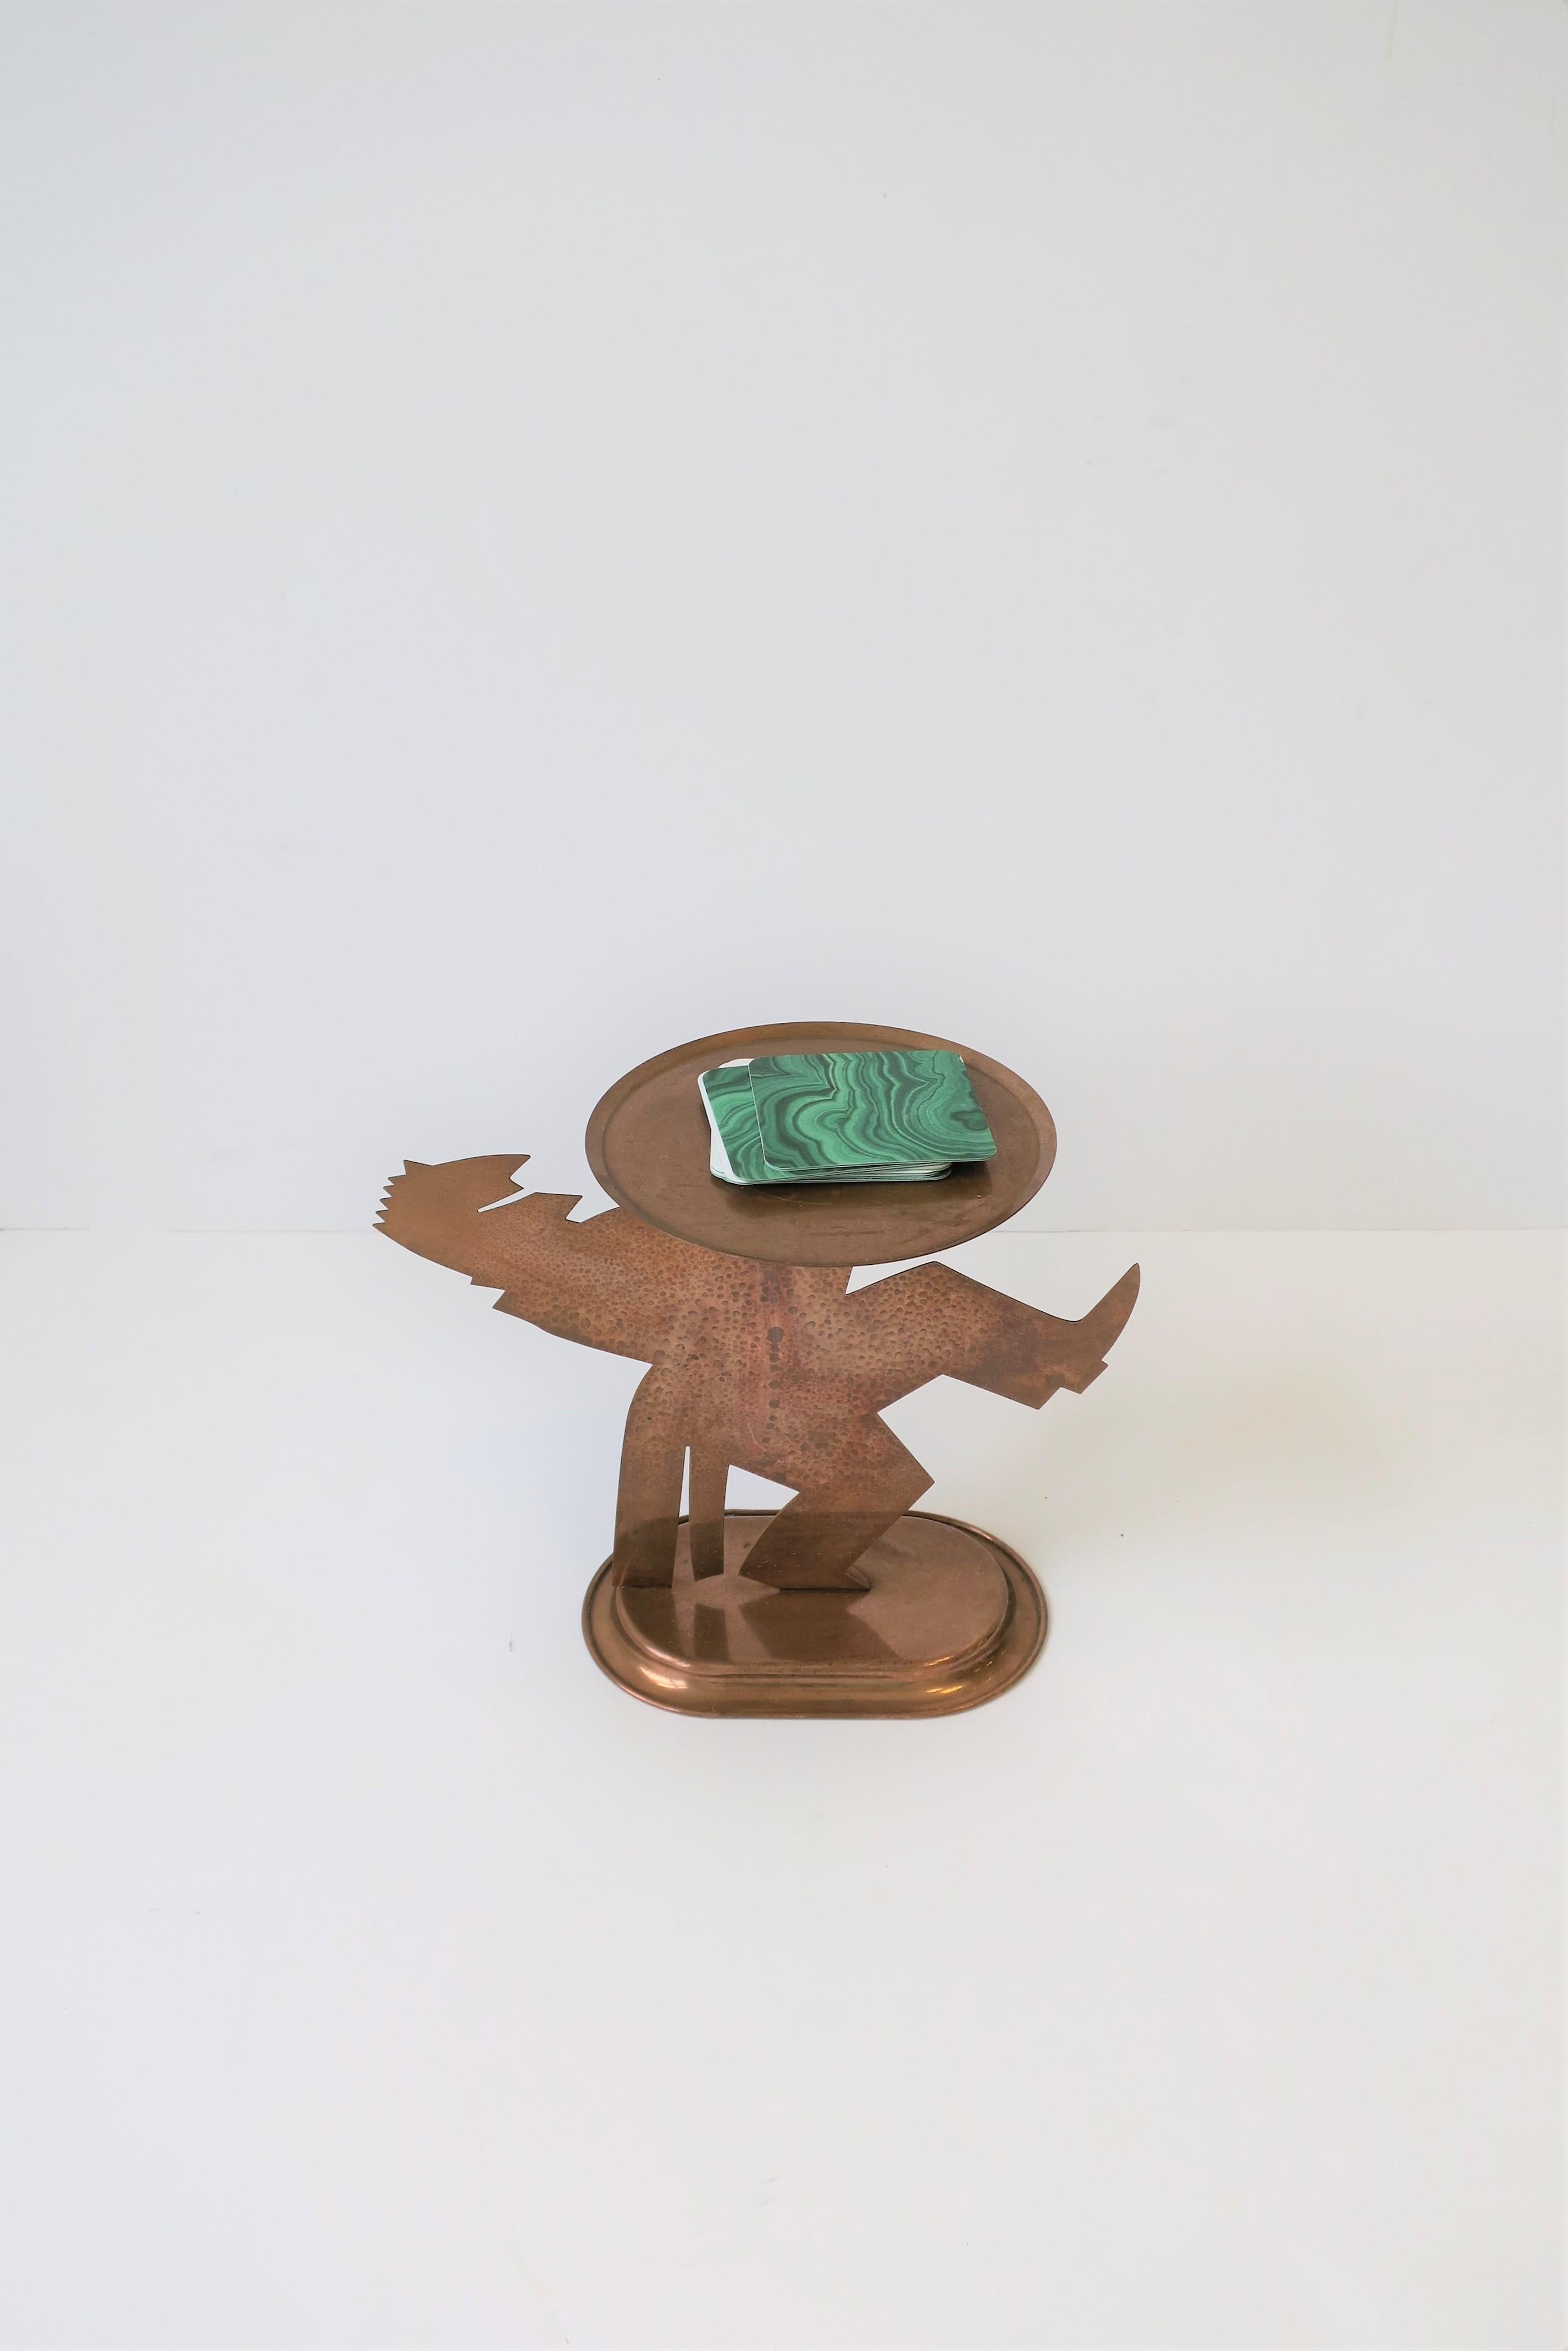 Art Deco Period Copper Figurative Sculpture Piece by Chase In Good Condition For Sale In New York, NY